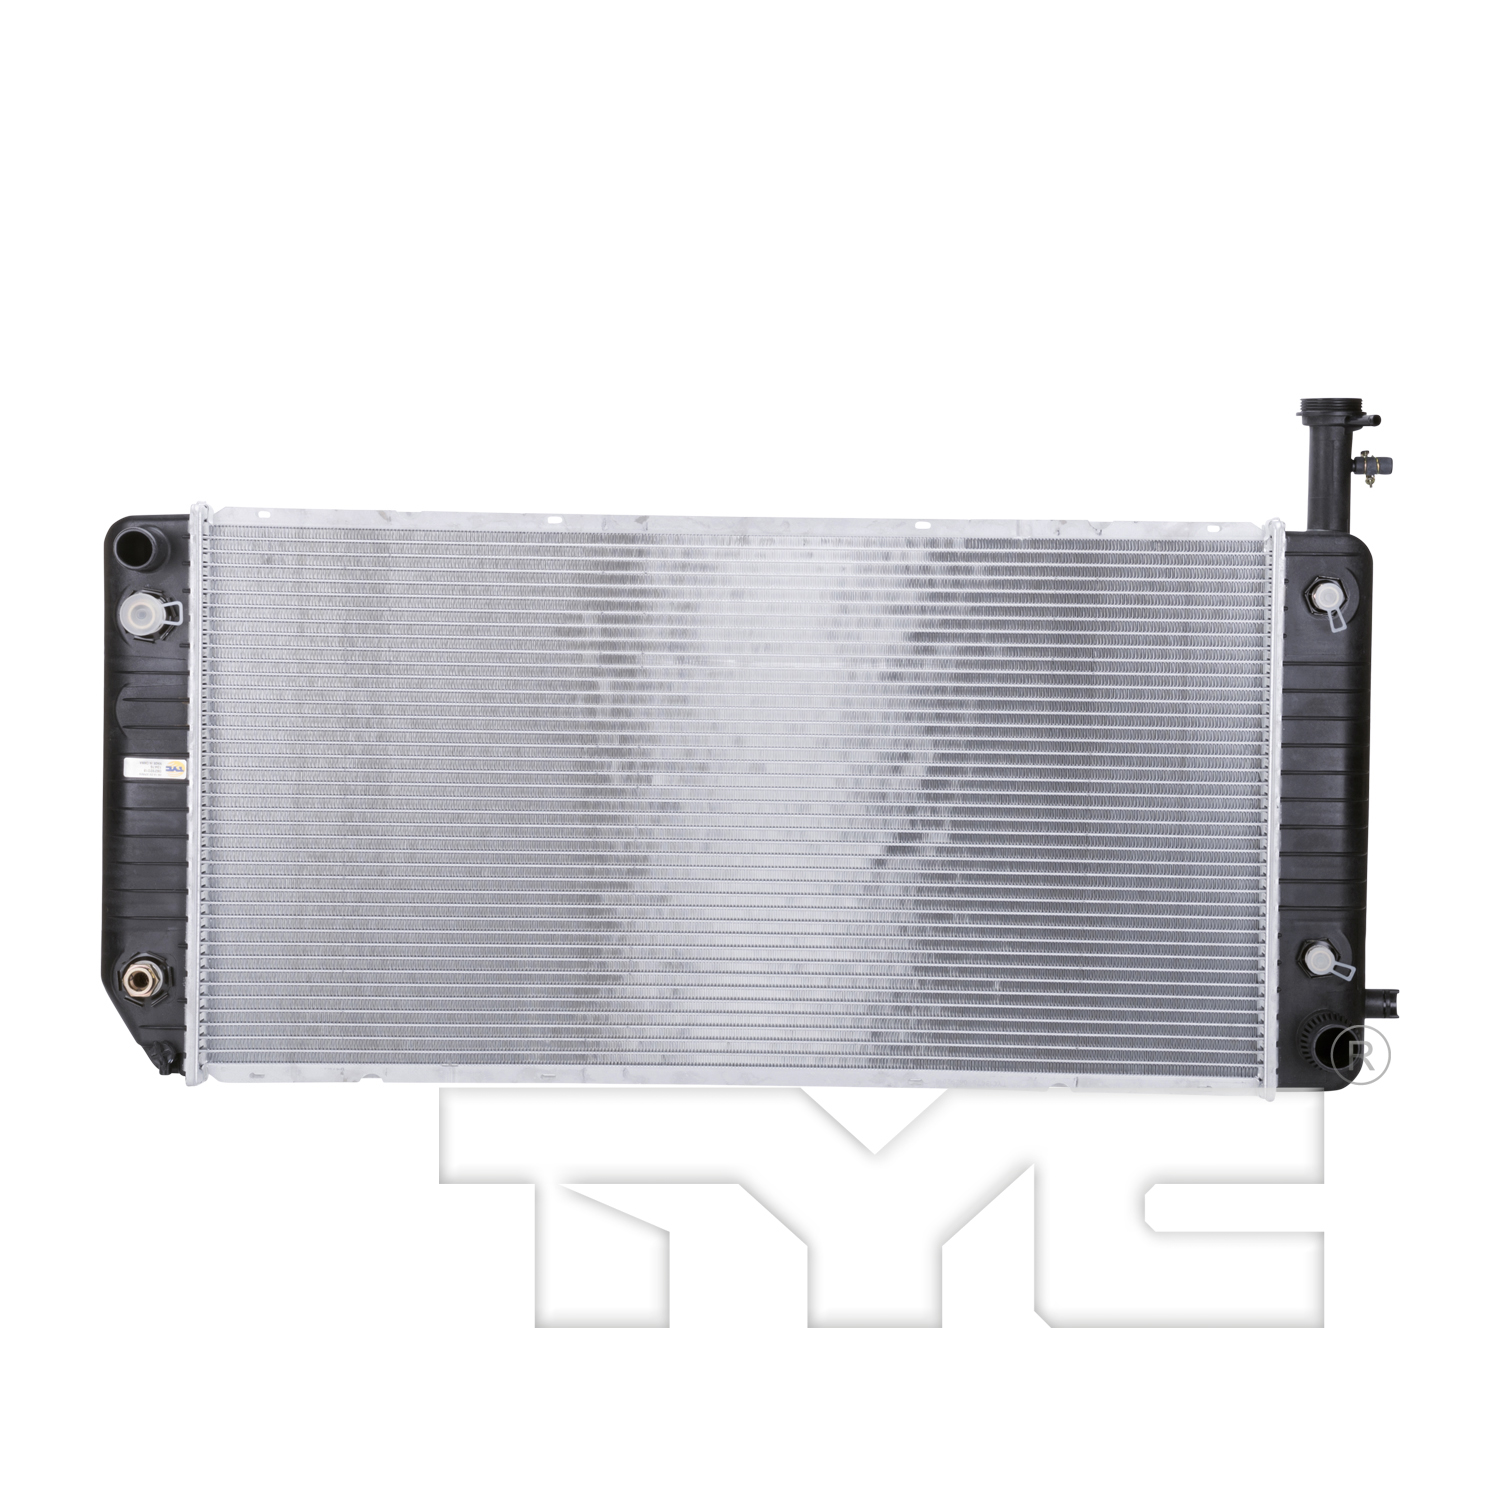 Aftermarket RADIATORS for CHEVROLET - EXPRESS 3500, EXPRESS 3500,09-14,Radiator assembly